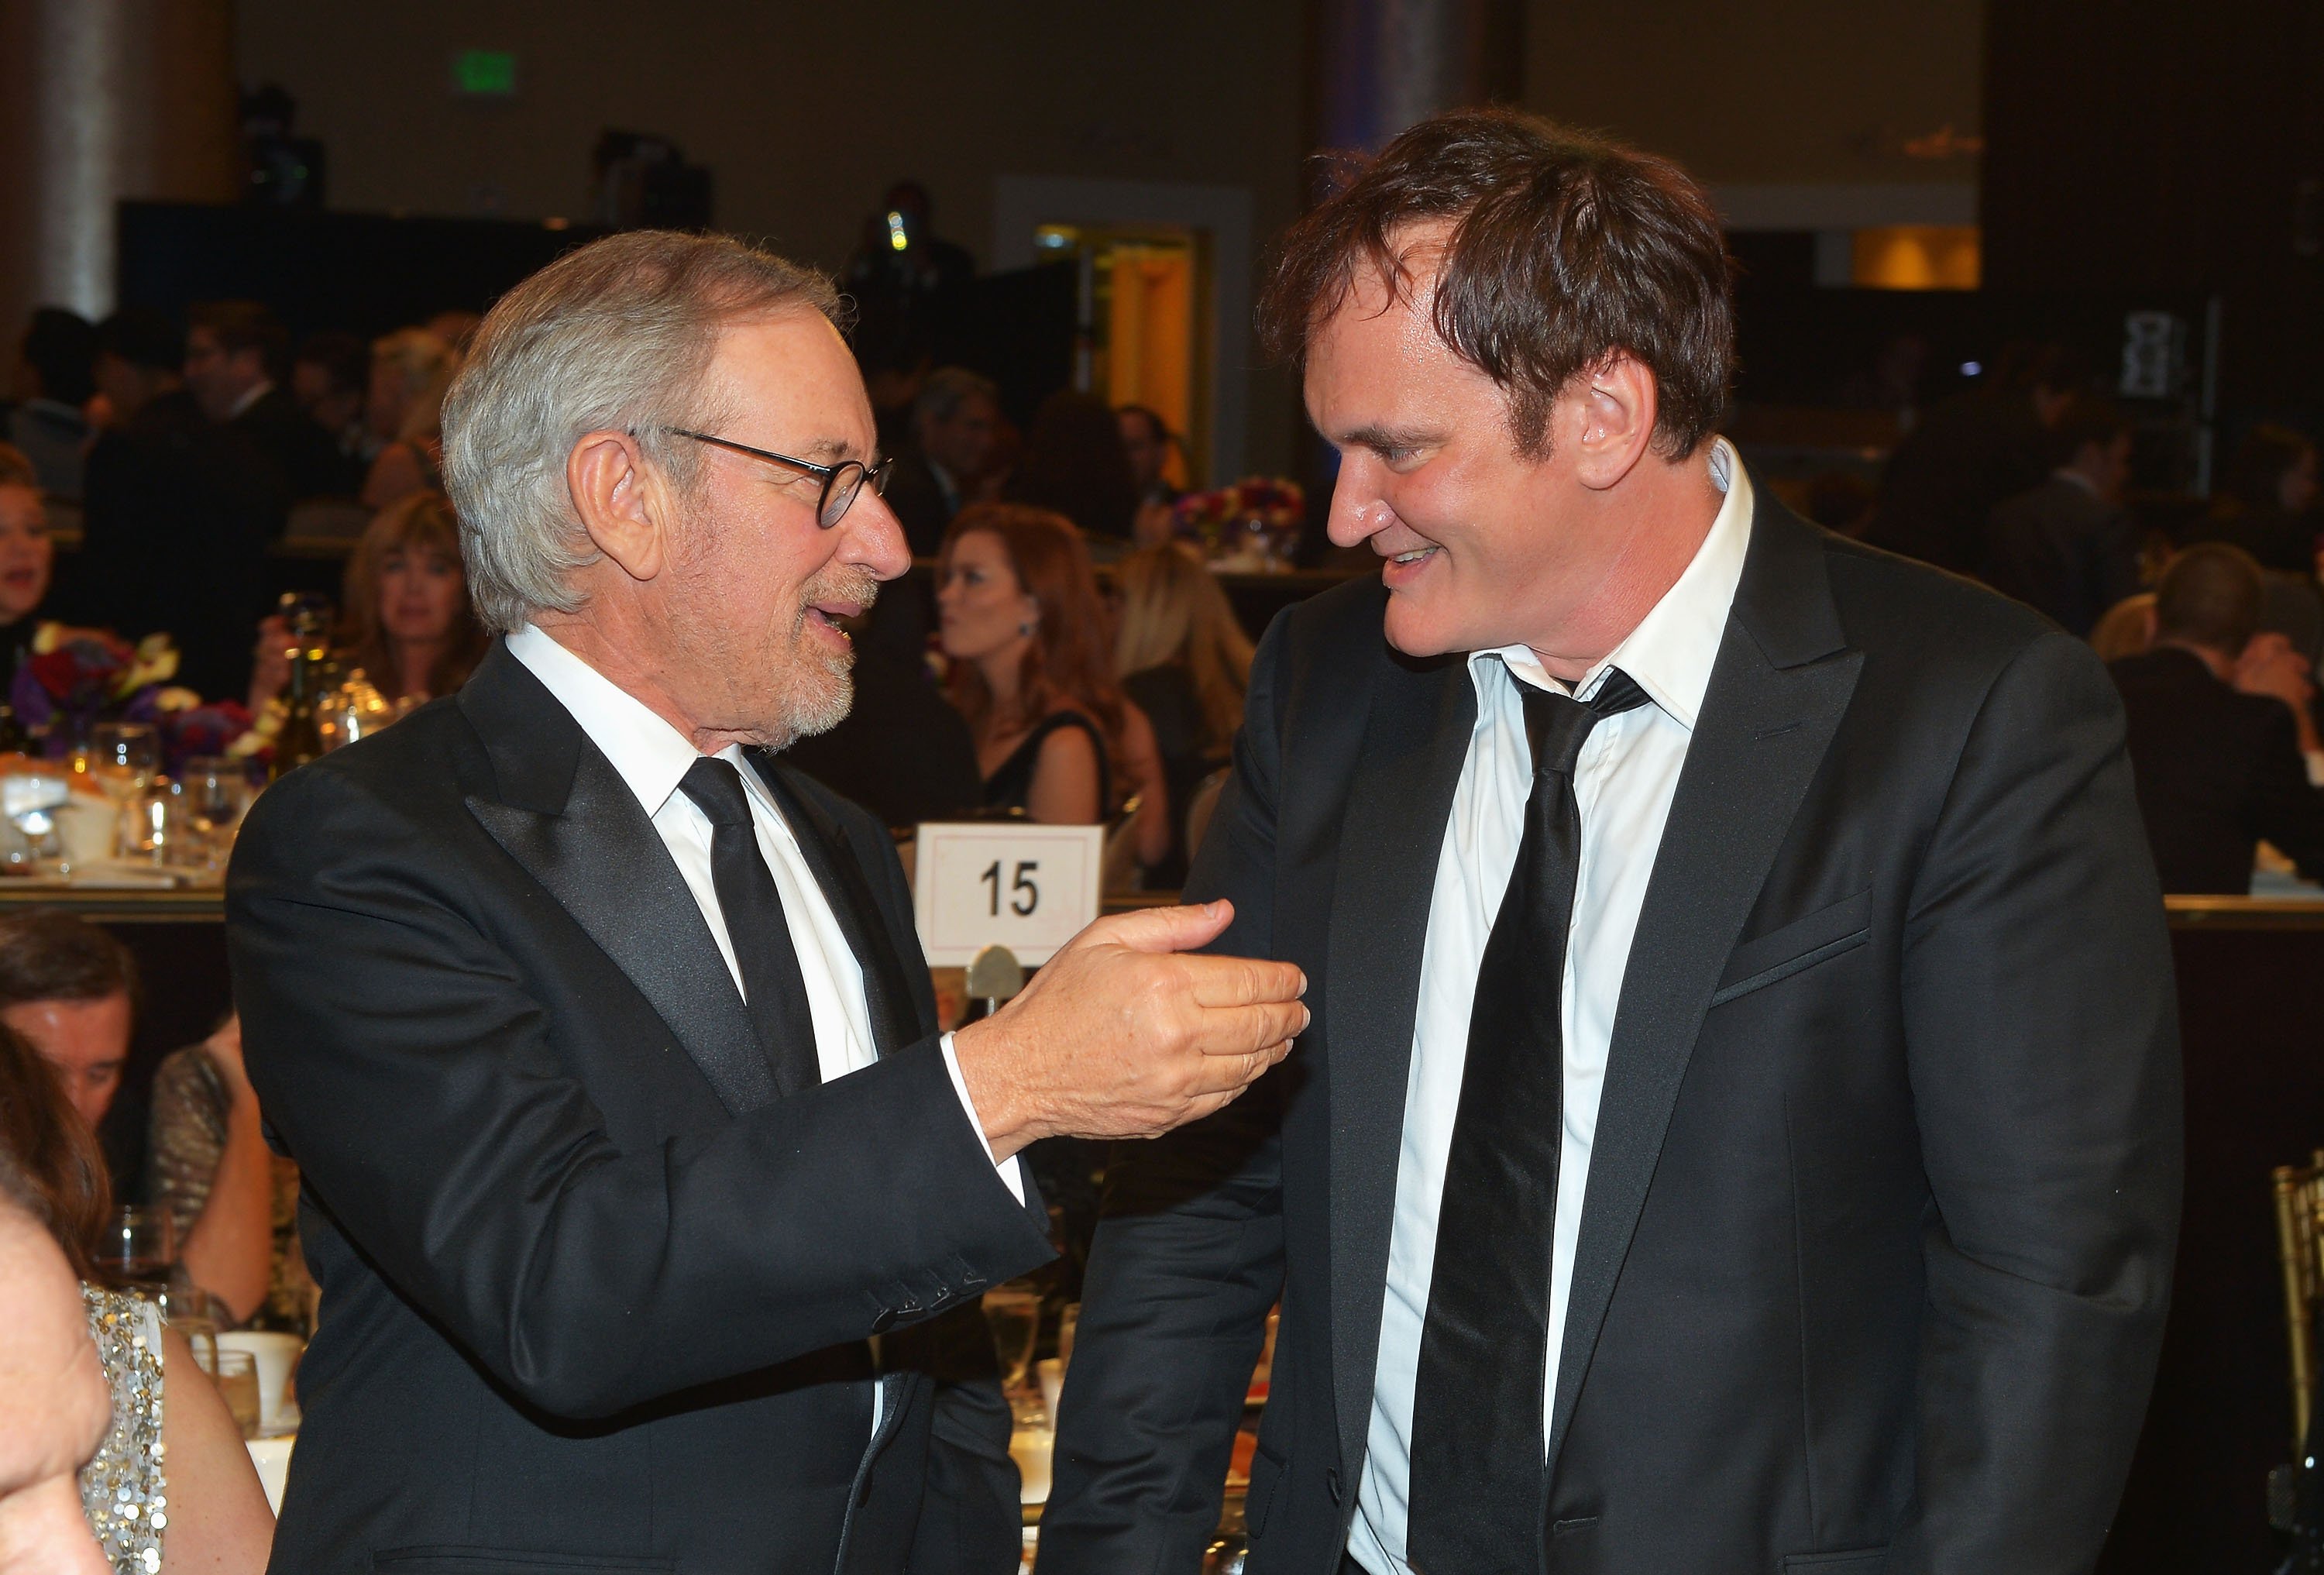 Steven Spielberg talks with Quentin Tarantino at the 2012 BAFTA Los Angeles Britannia Awards to celebrate the best in movies